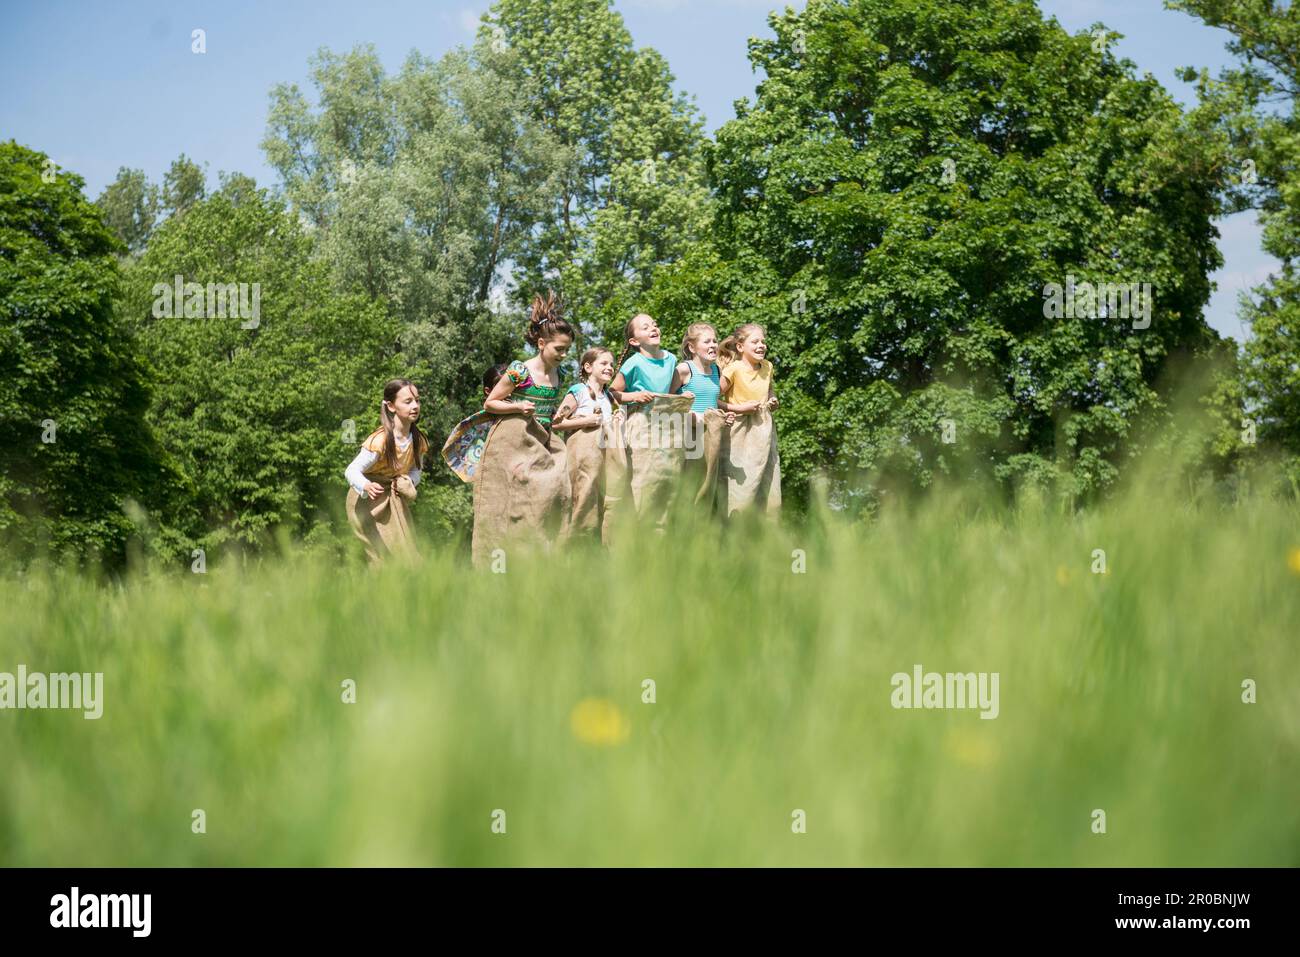 Group of girls playing in sack race on a field, Munich, Bavaria, Germany Stock Photo